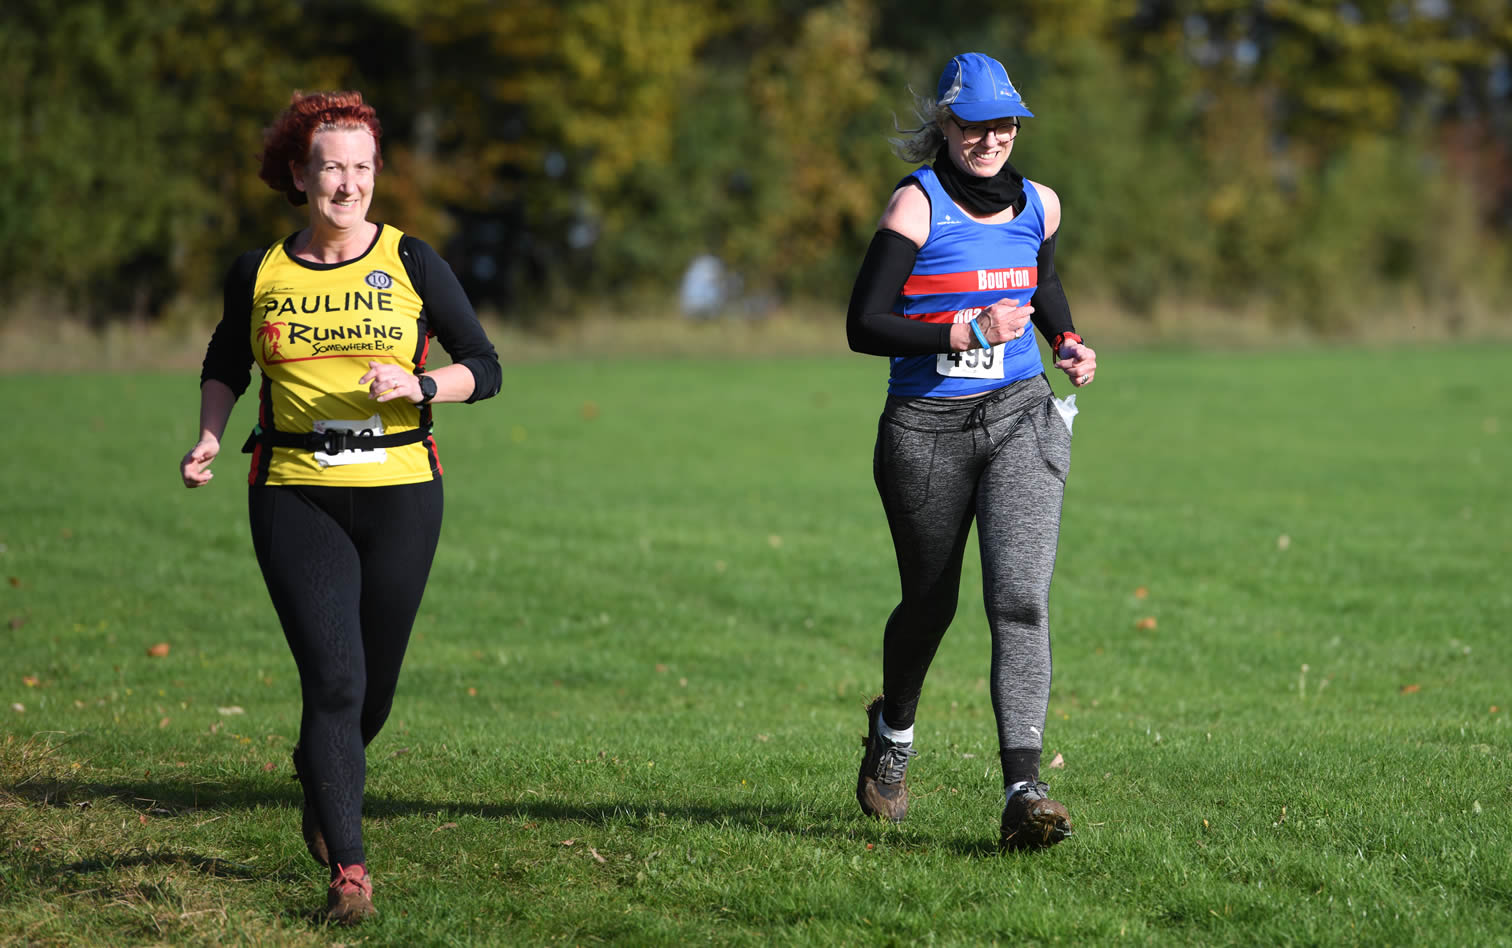 Nicky at Gloucestershire AAA Cross Country League, Cirencester Park - 30th October 2021